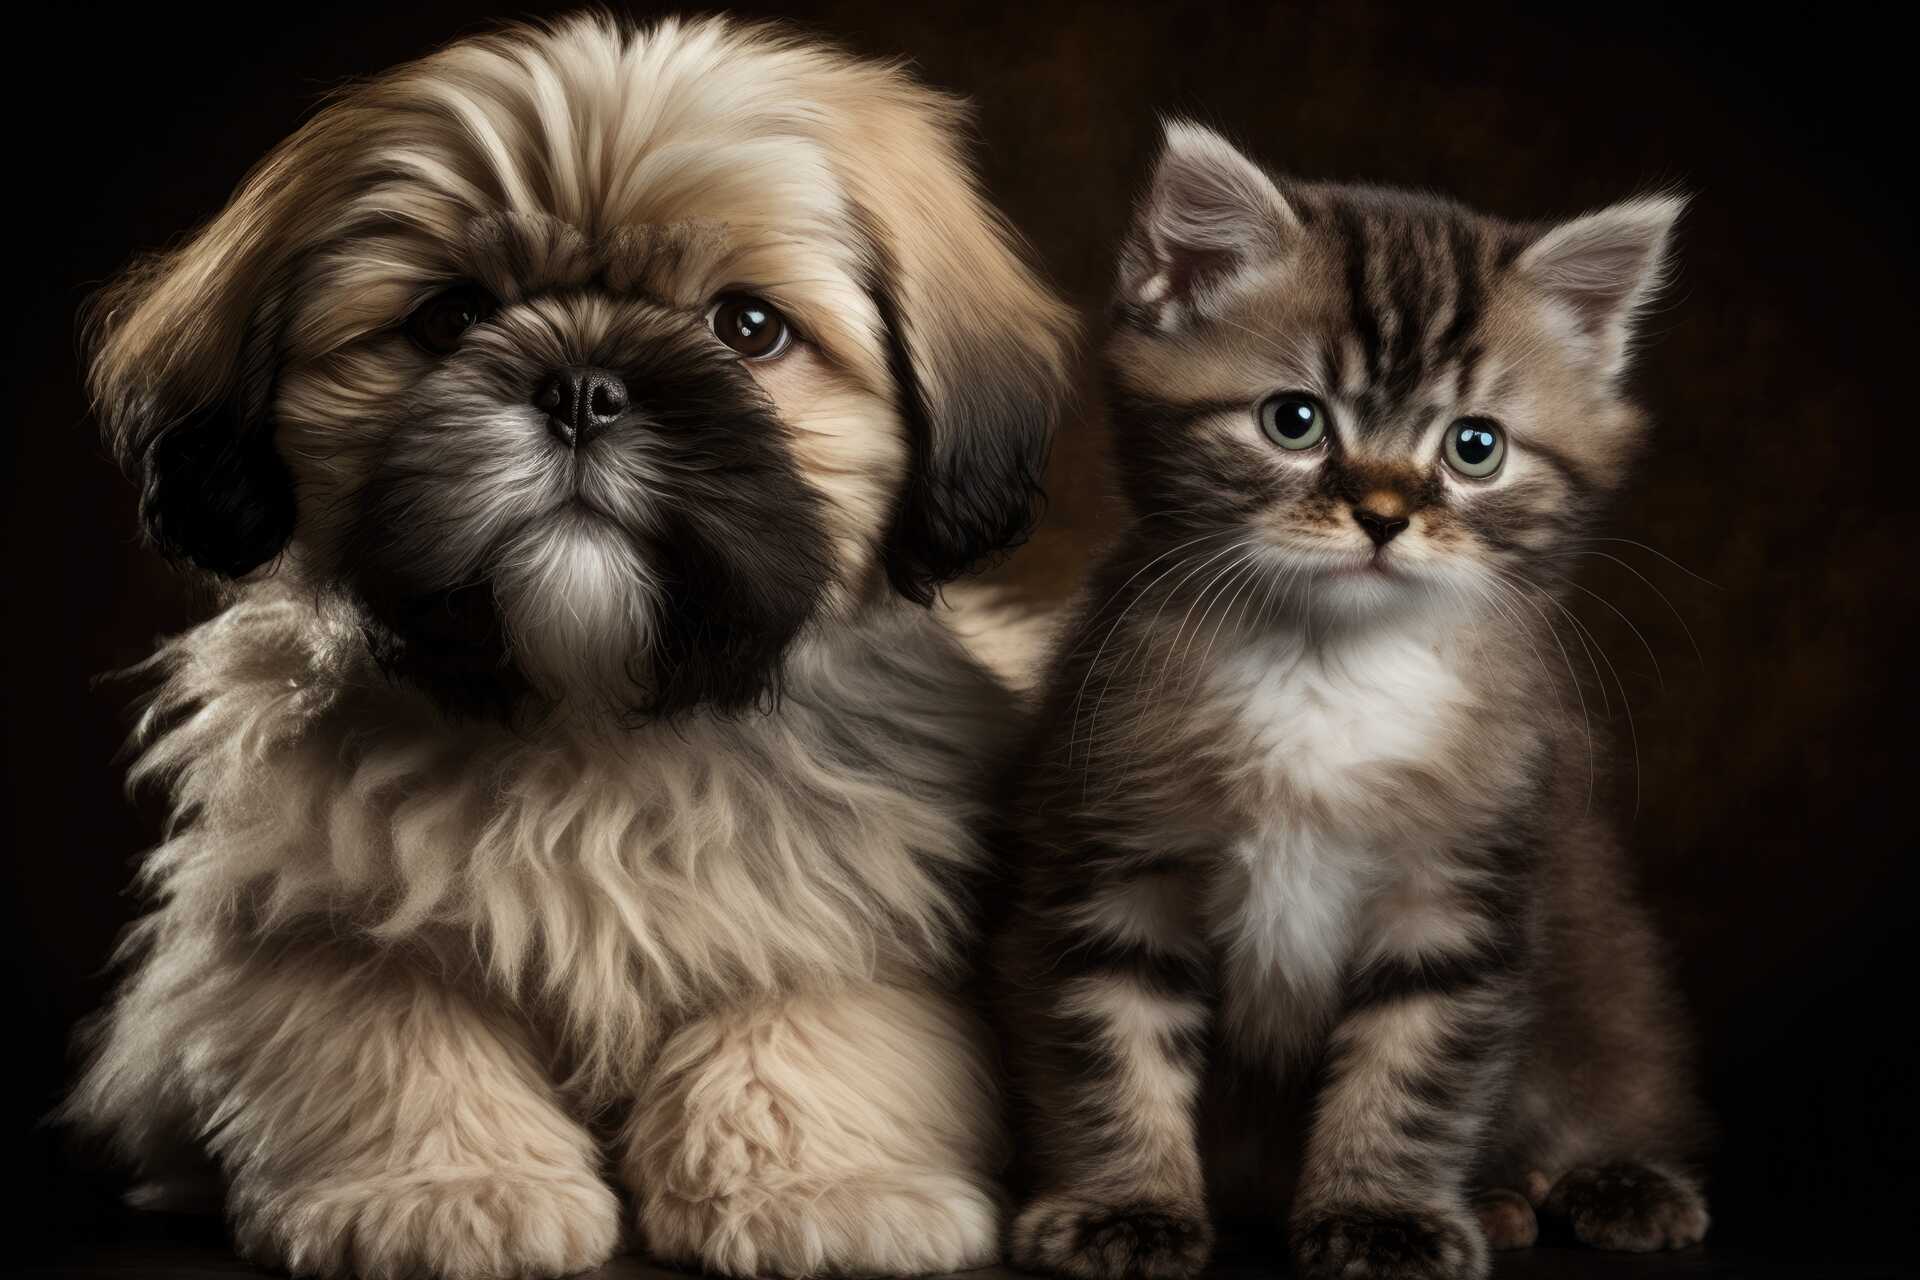 Tabby cat and Lhasa apso puppy photograph